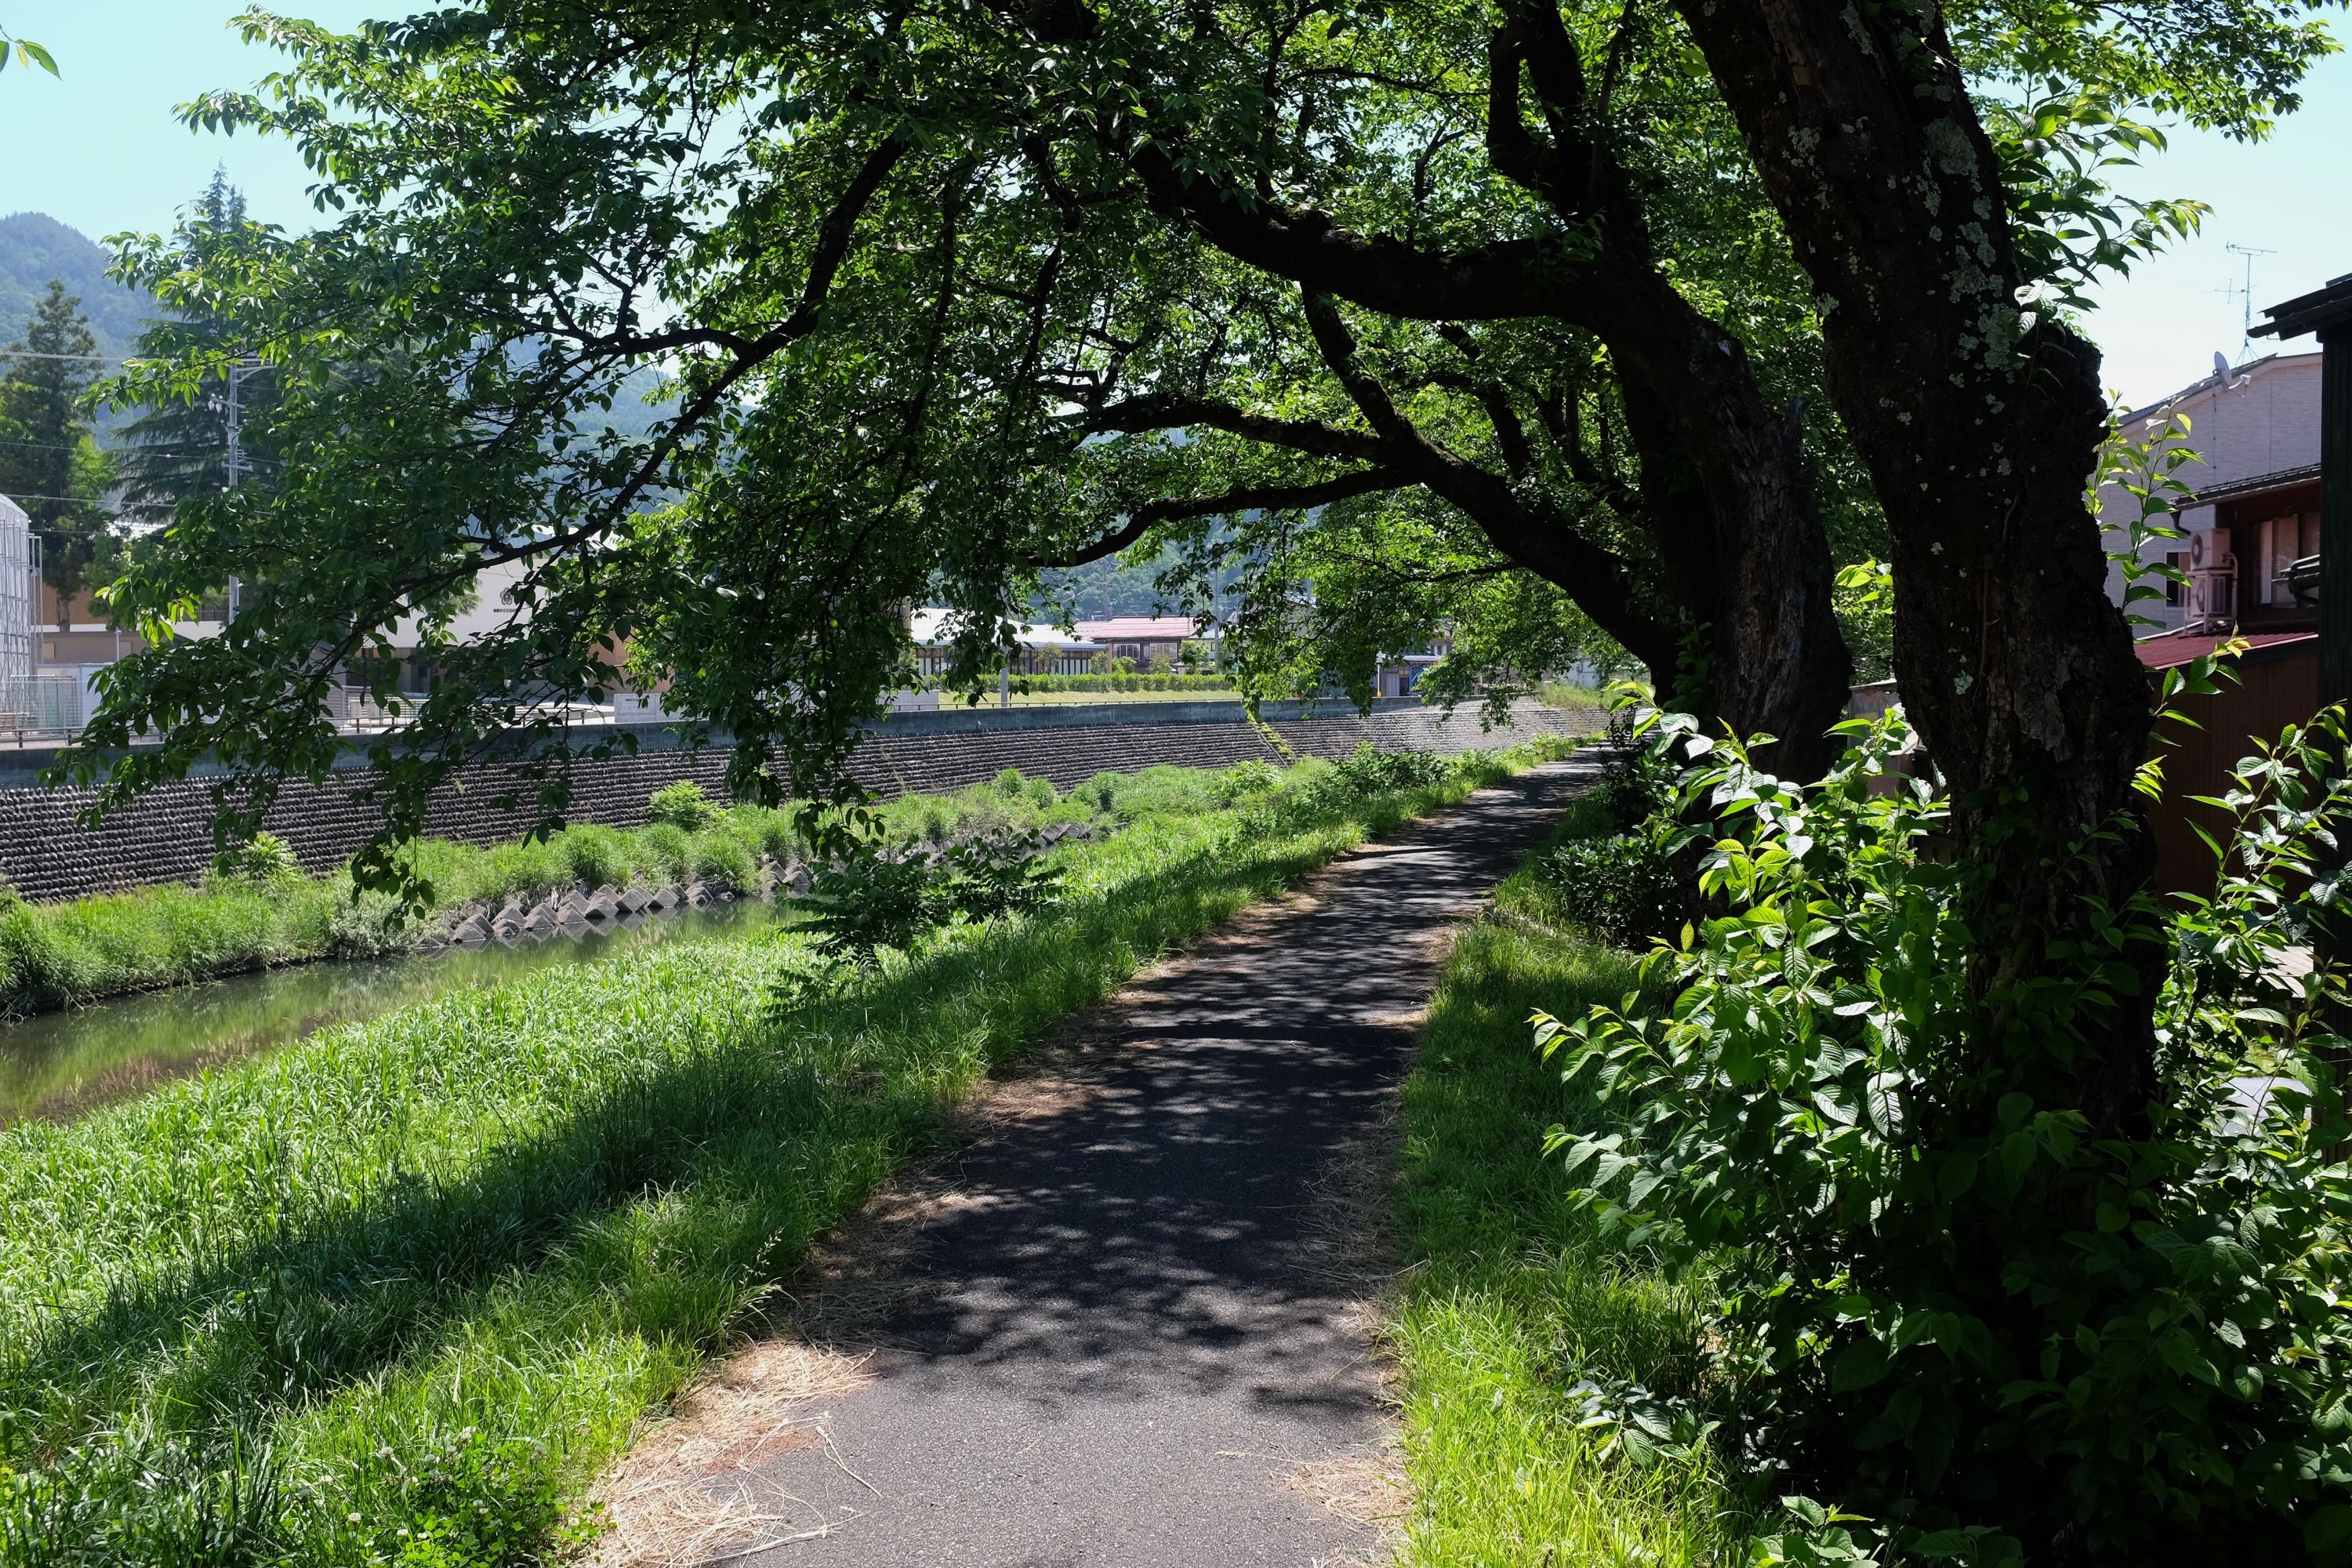 A path by a stream lined with large cherry trees.